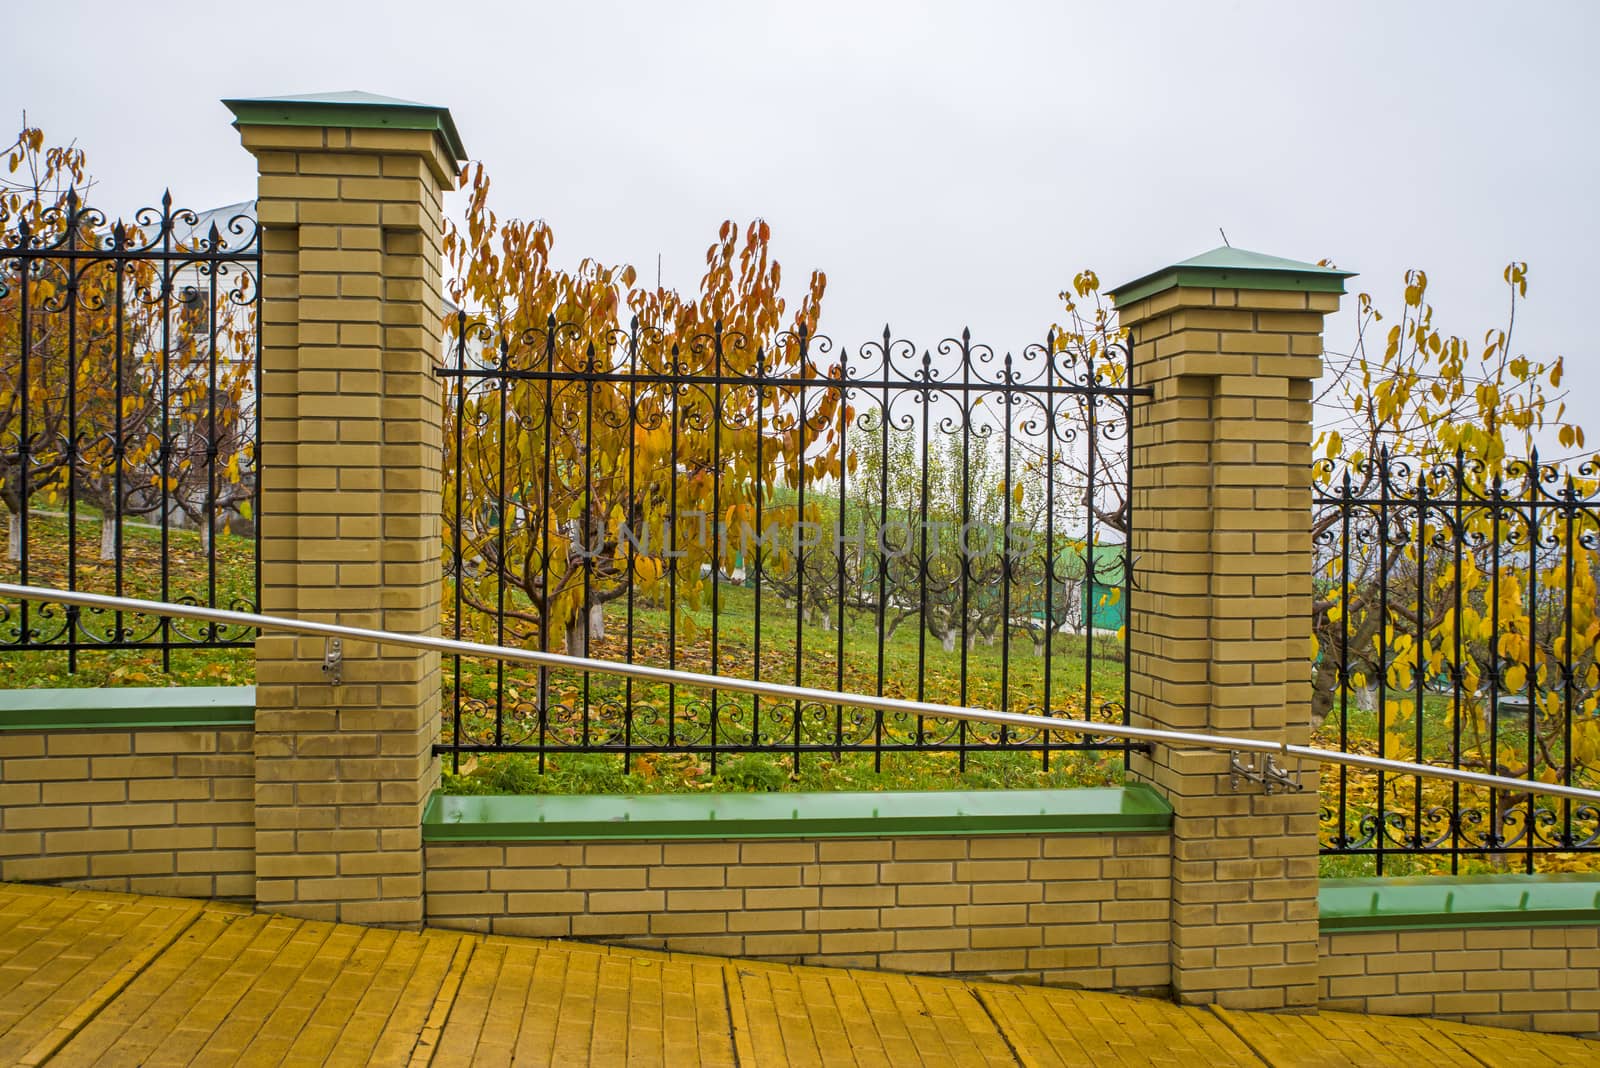 Metal fence and orchard in a autumn landscape